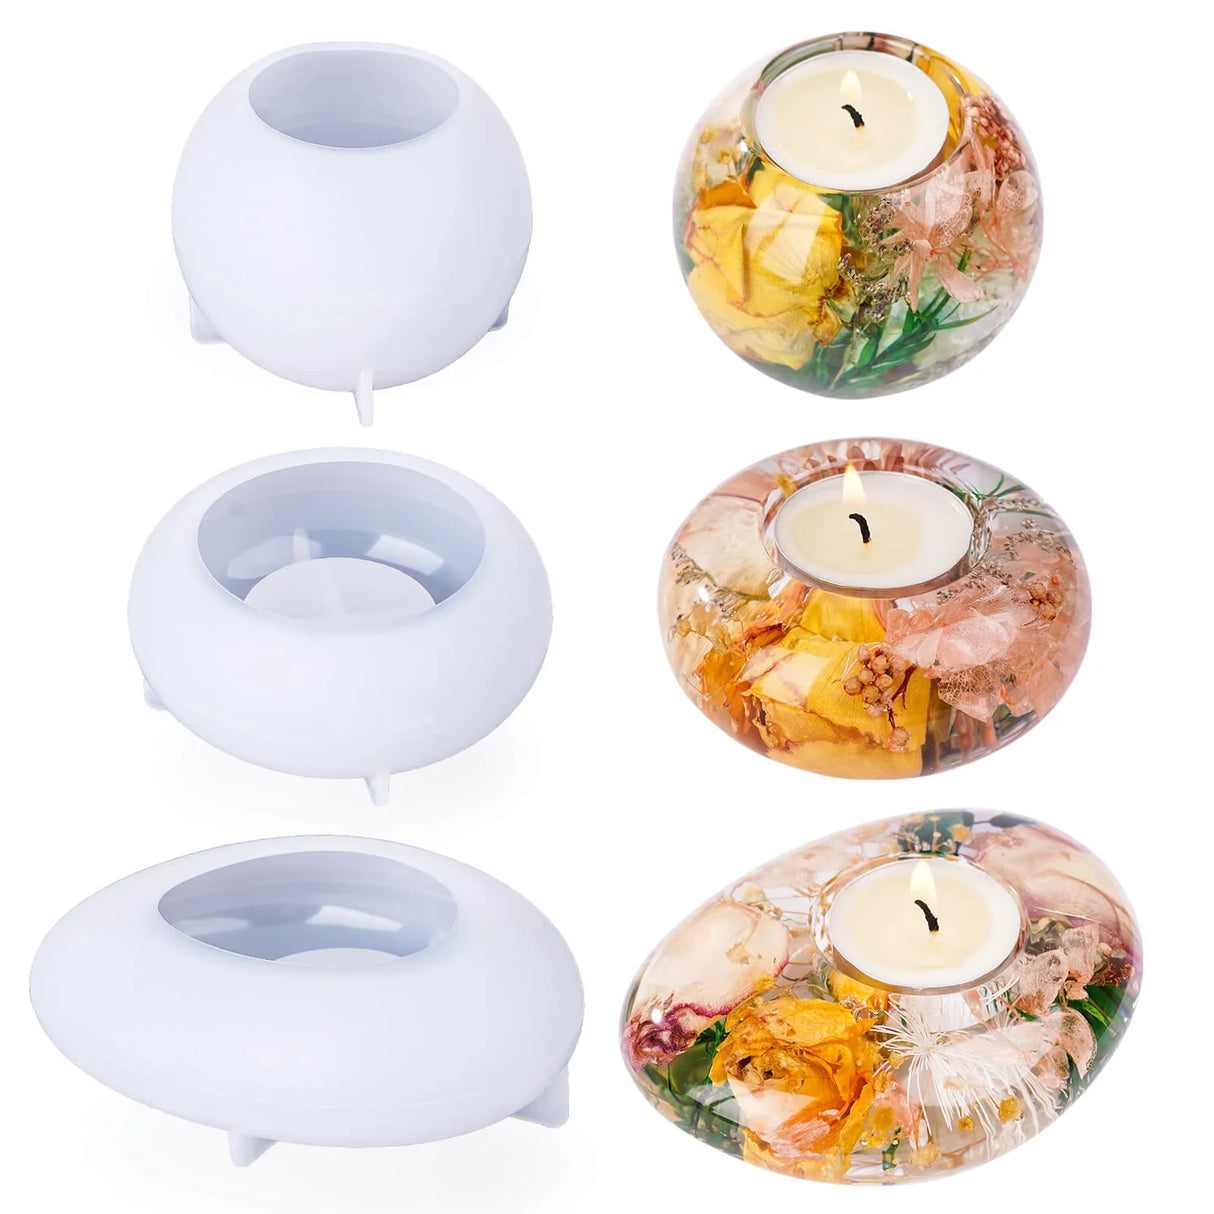 Resin Silicone Mold - Tealight Candle Holders